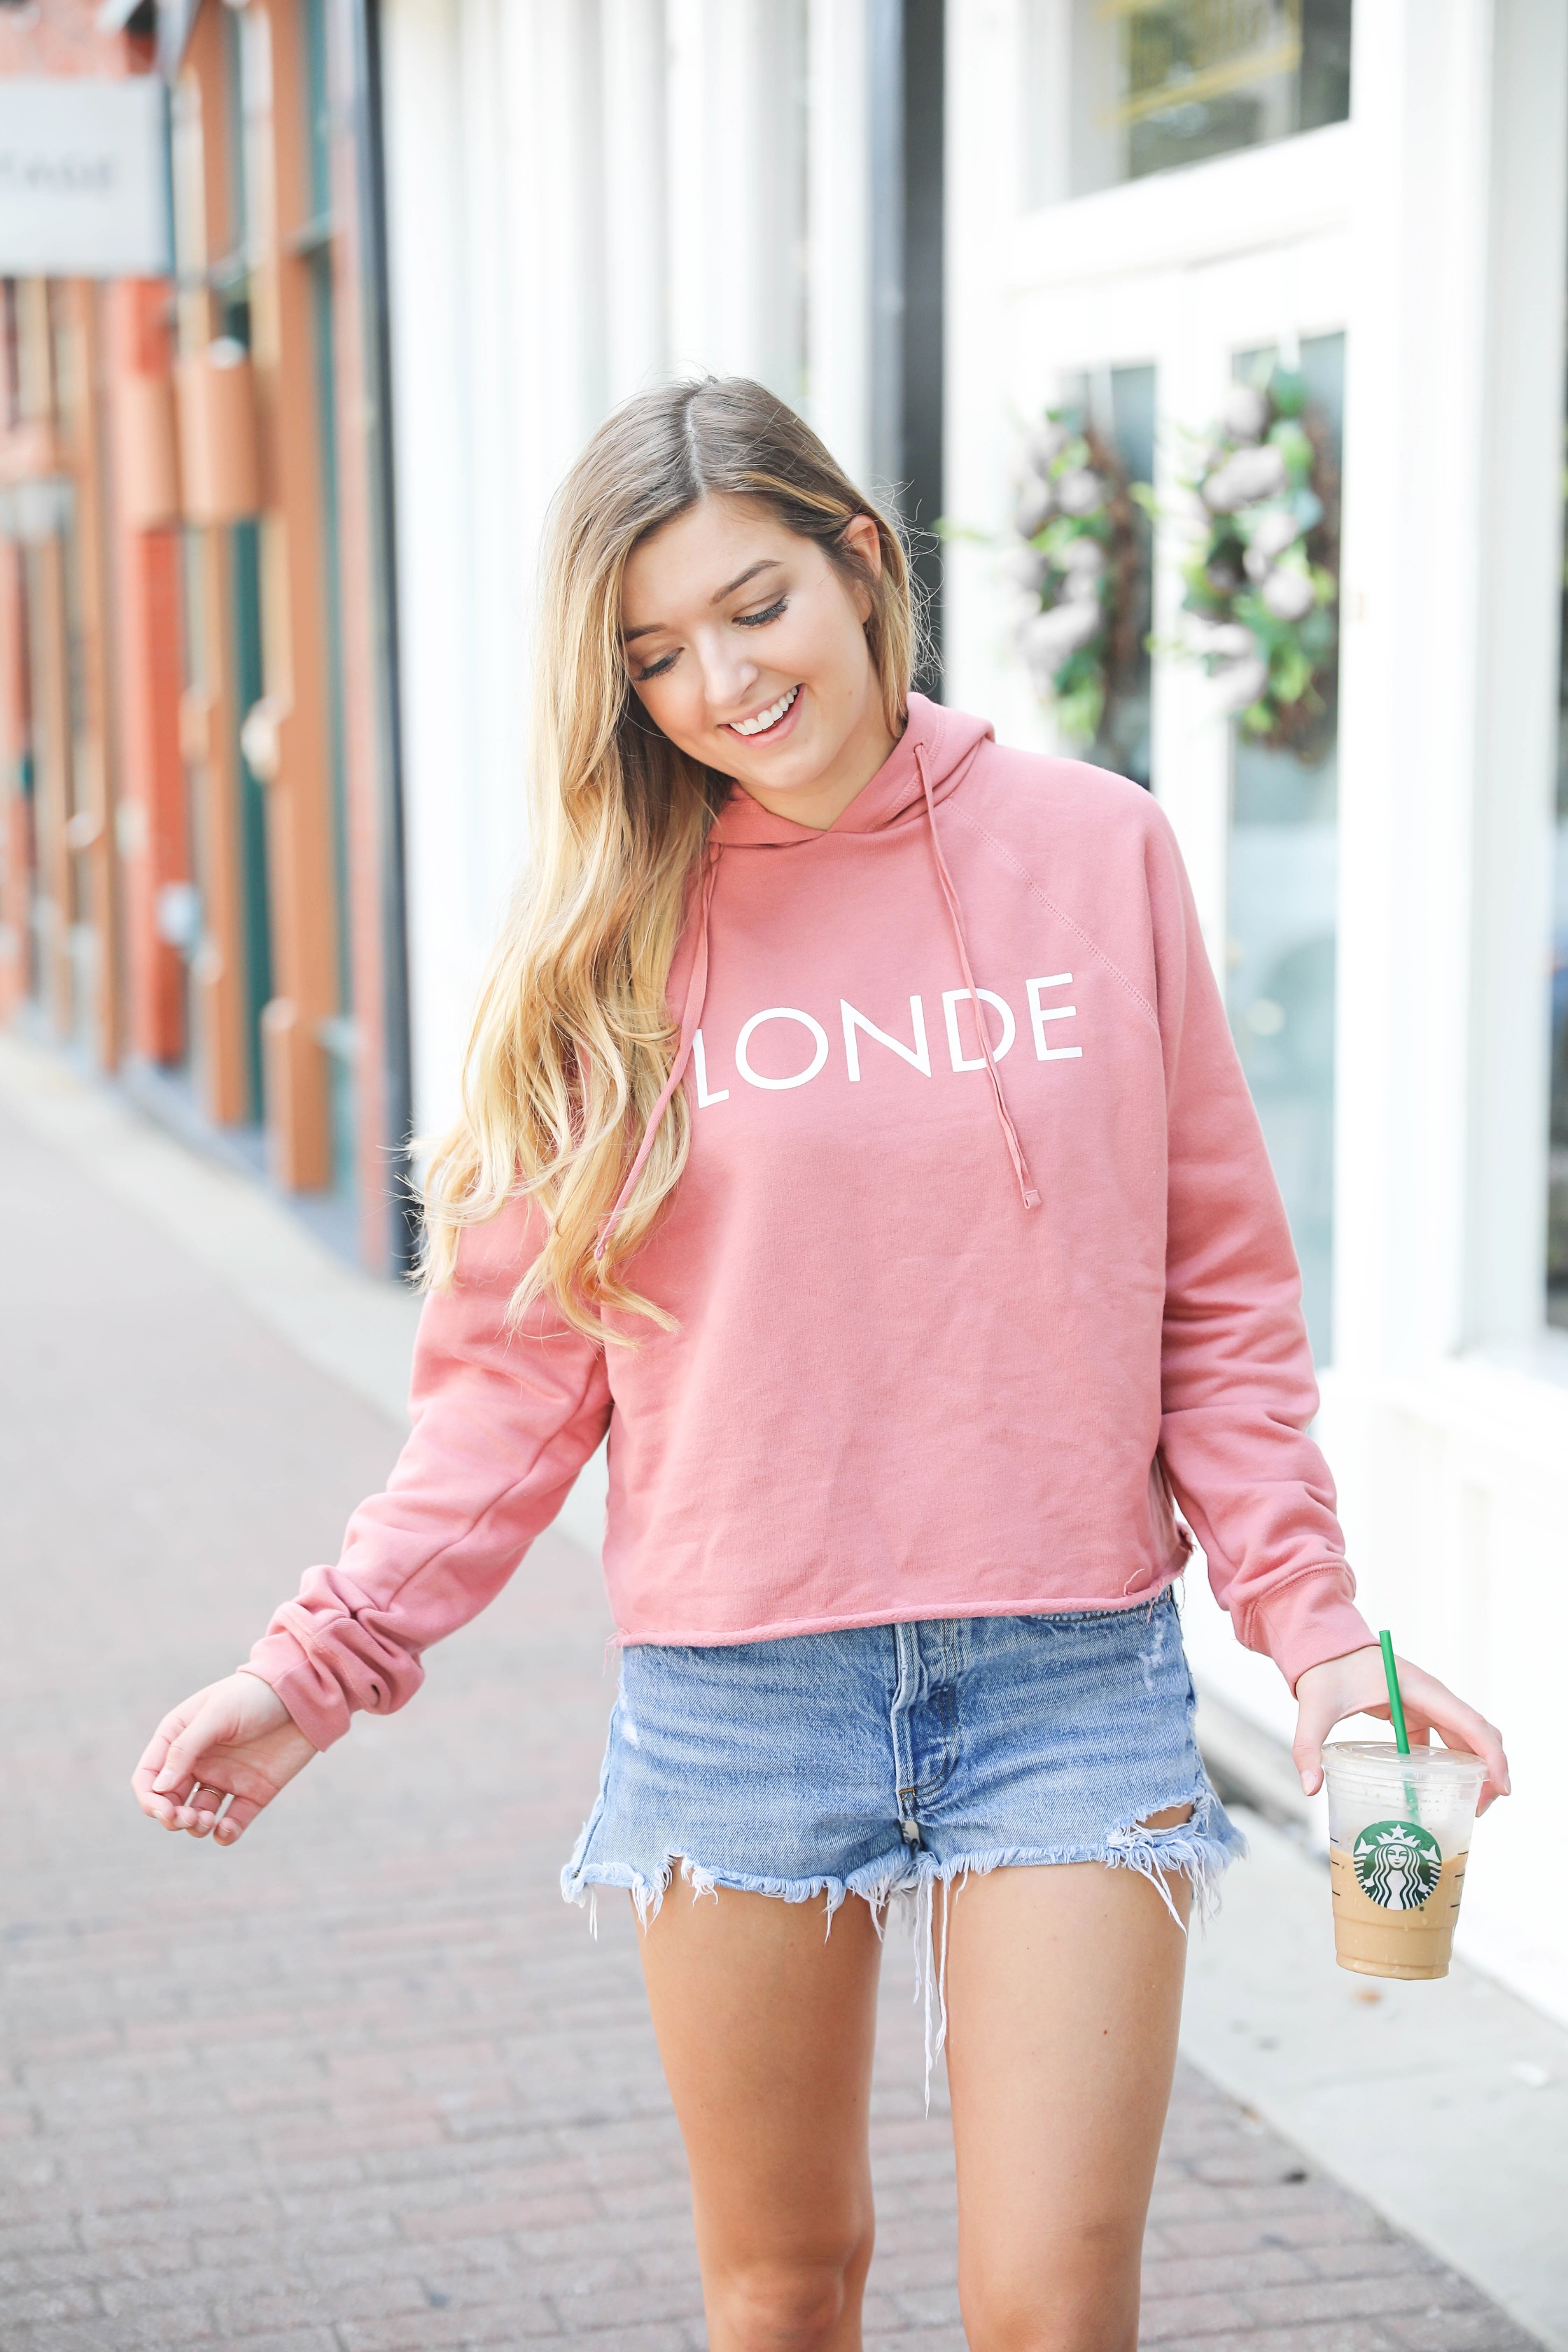 Blonde sweatshirt! I love this cute coral sweatshirt that says "Blonde." It also comes in brunette and red head plus the sweatshirt comes in black and lavender! Such a fun summer style outfit! Details on fashion blog daily dose of charm by lauren lindmark